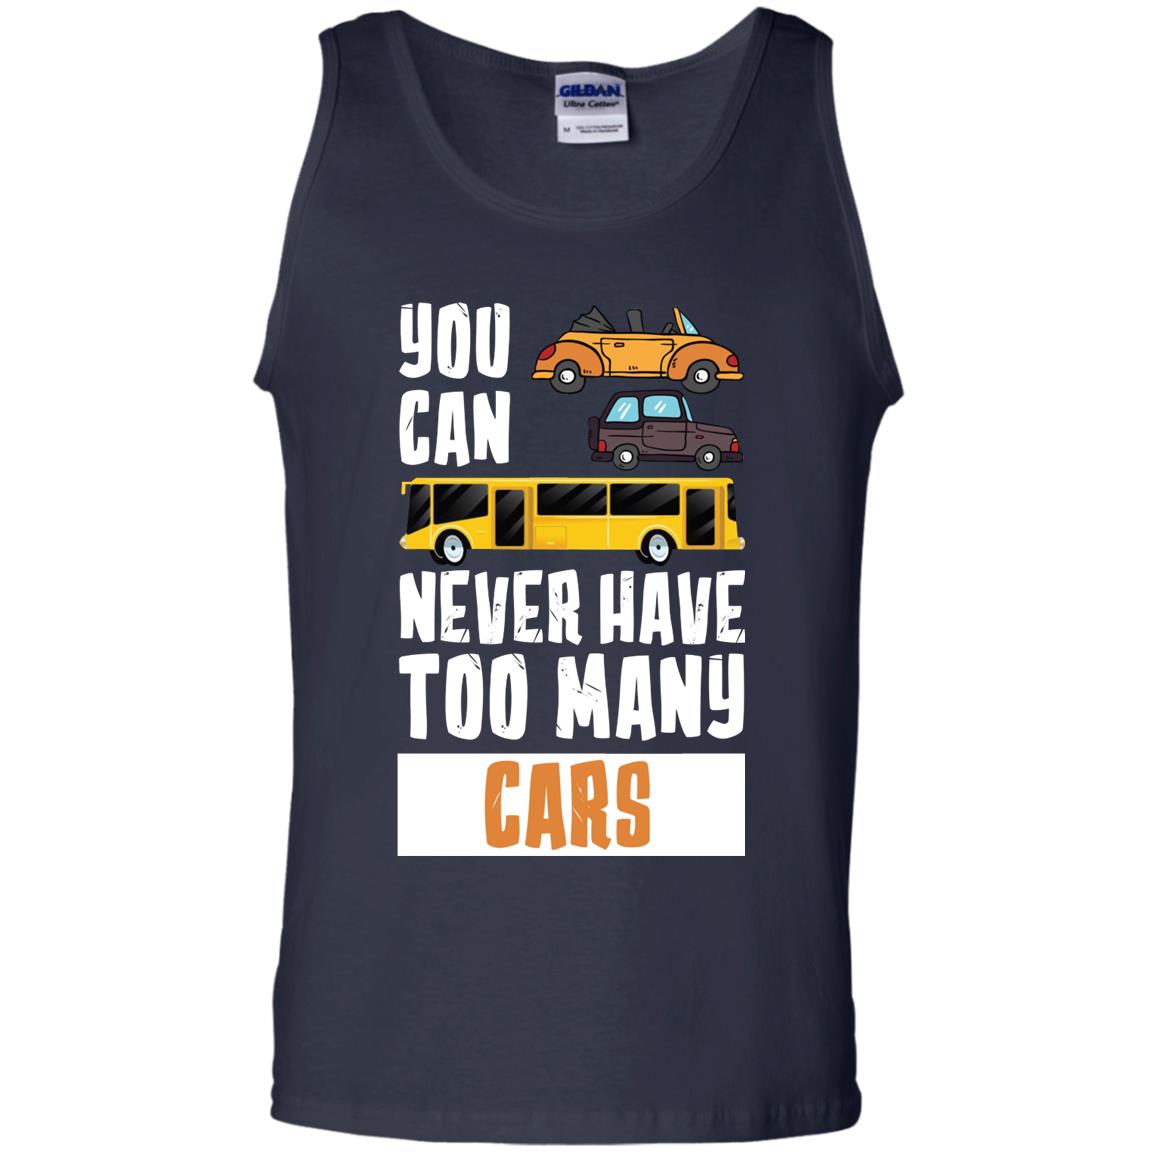 You Can Never Have Too Many Cars Shirt1 G220 Gildan 100% Cotton Tank Top